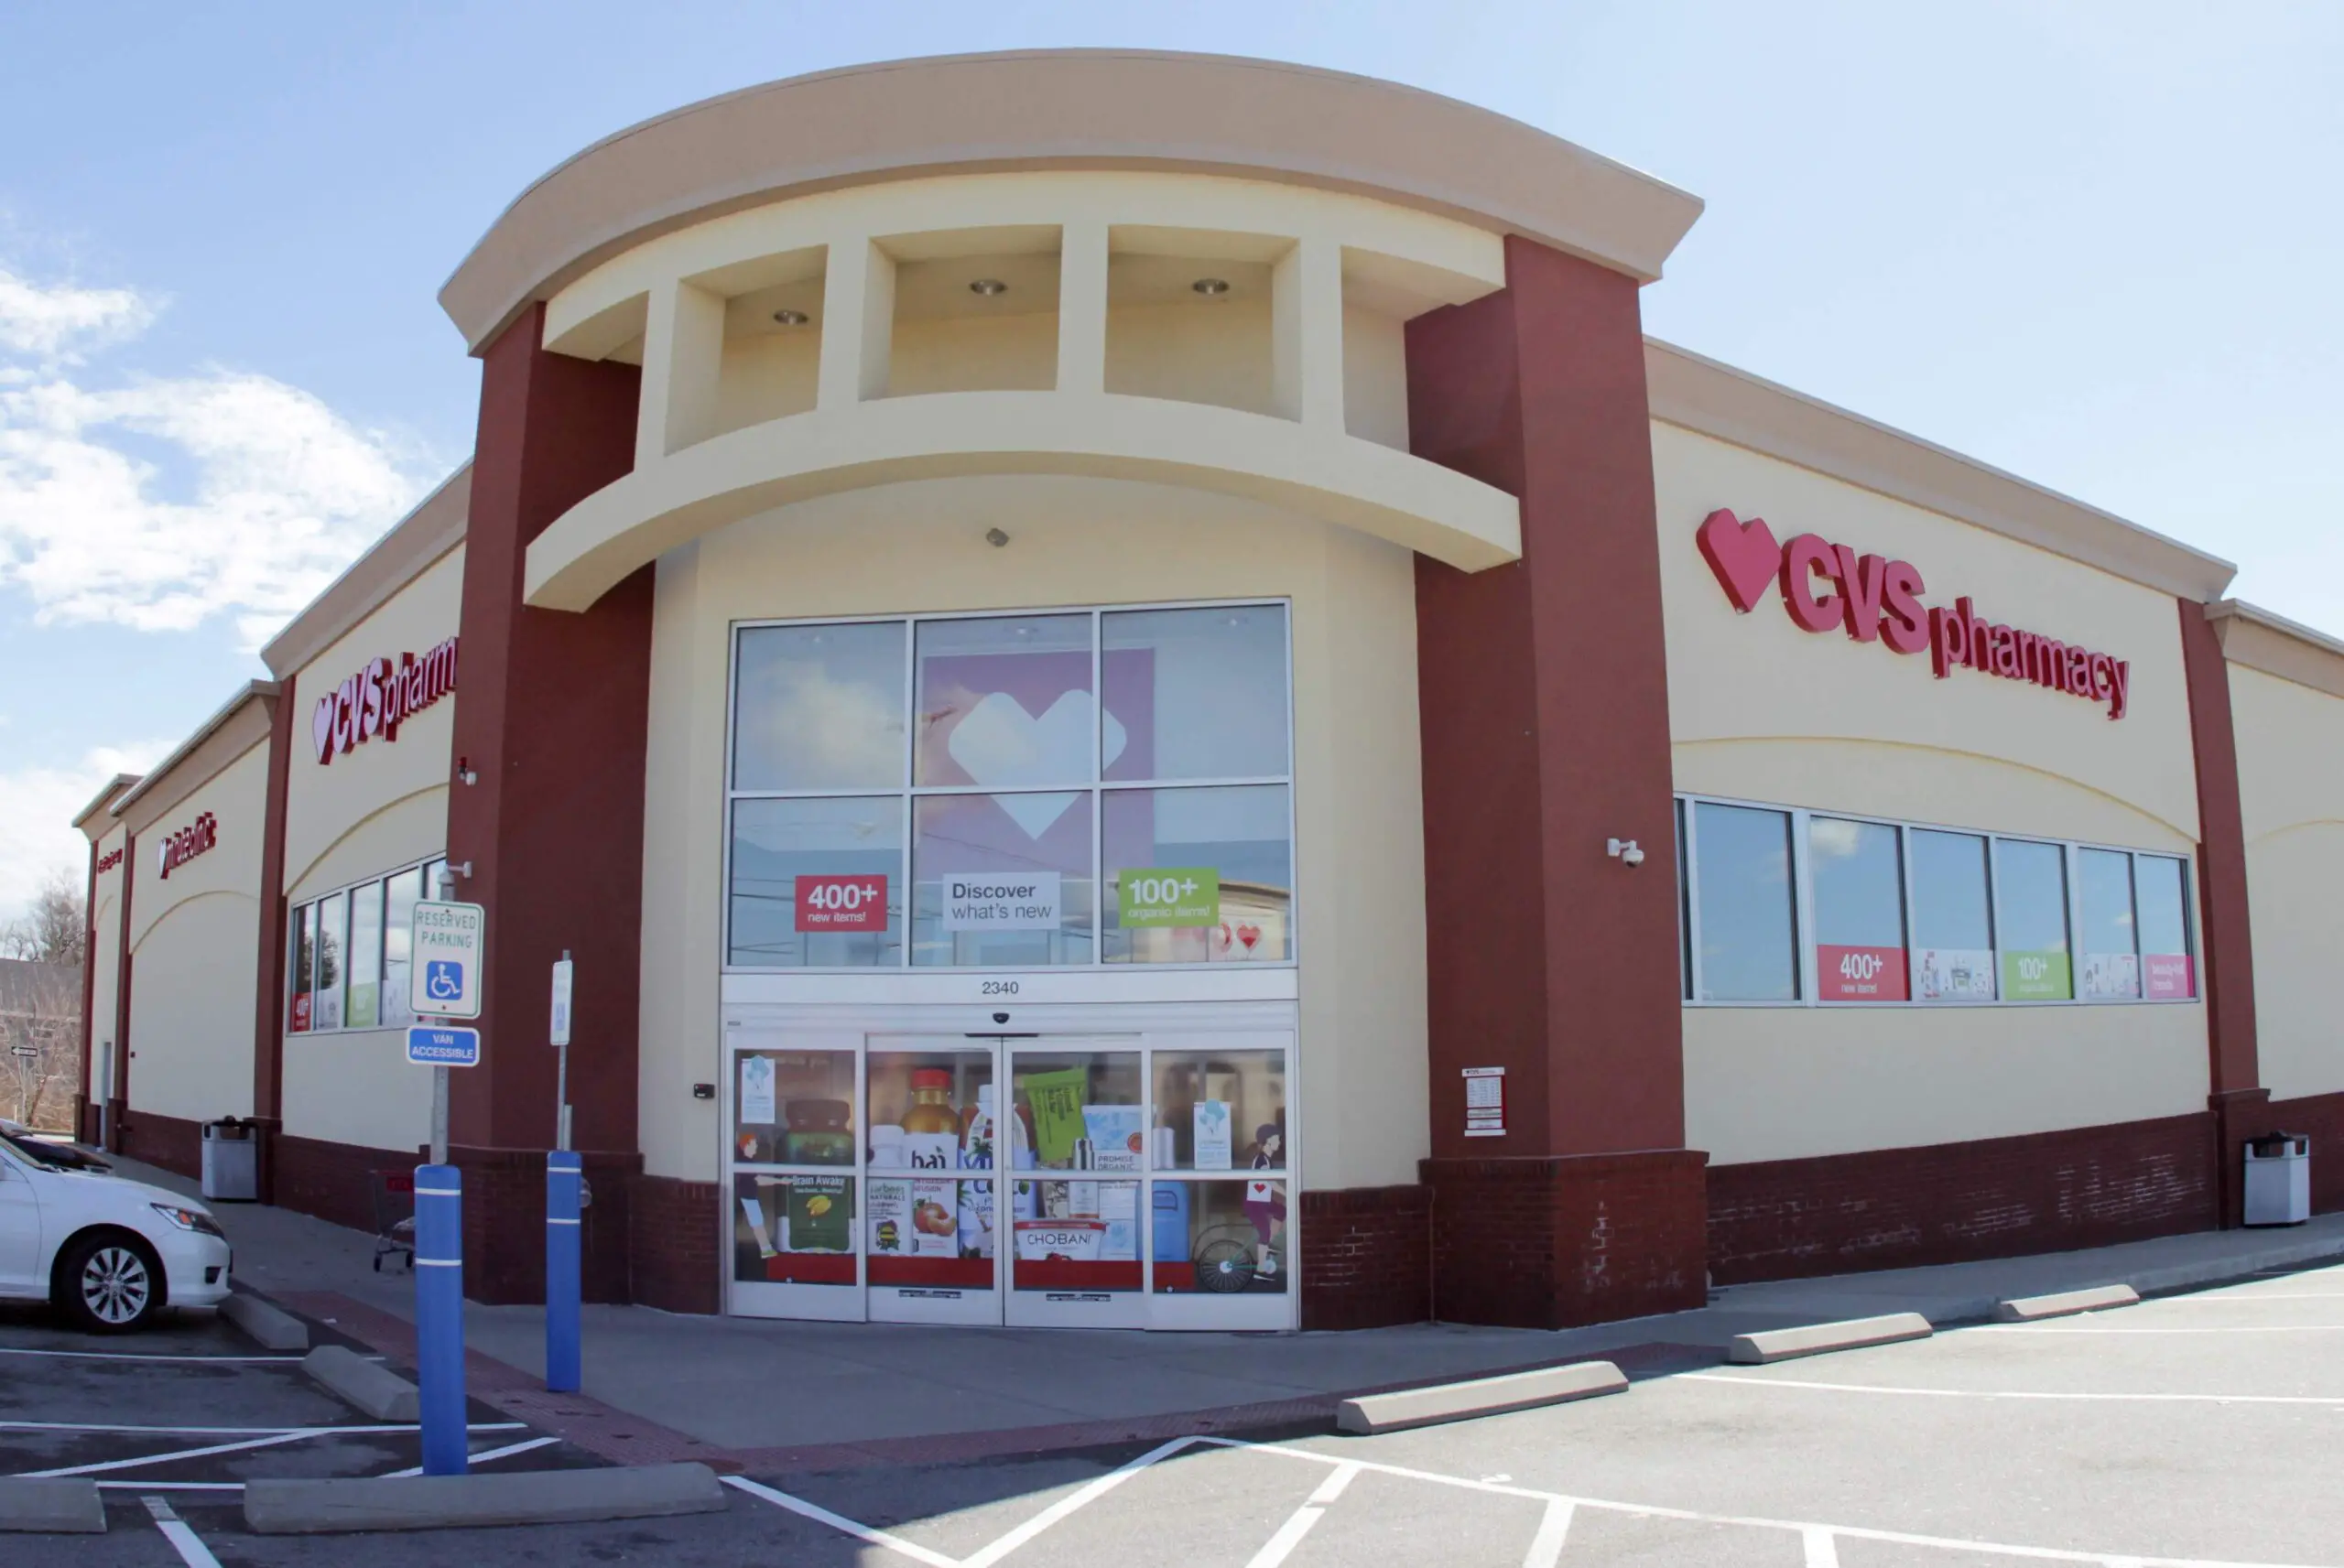 How Much Does Film Developing Cost at CVS?